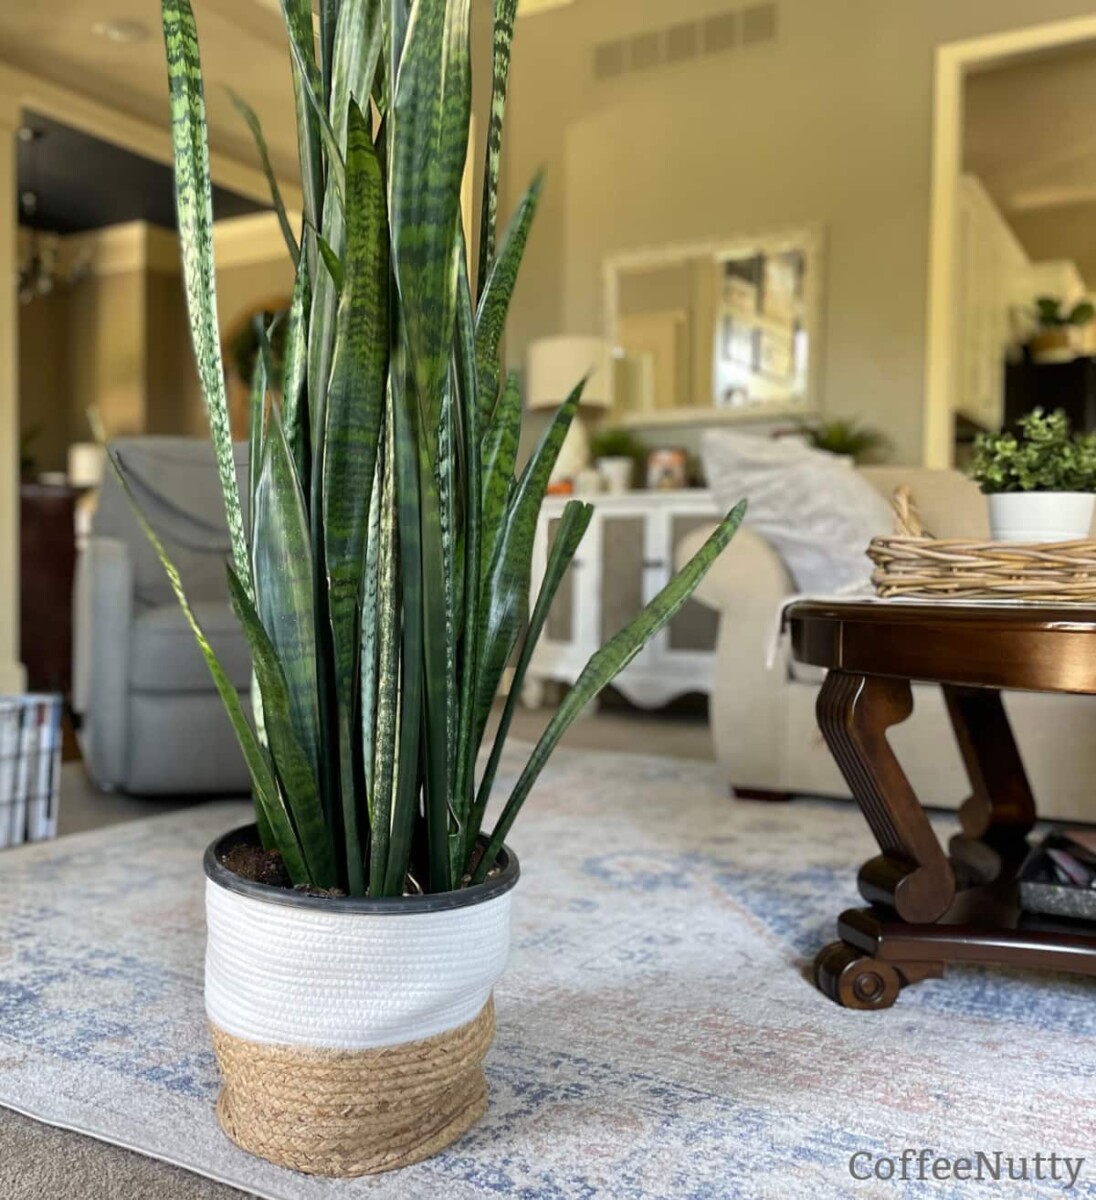 Large snake plant in brown and white basket sitting on living room rug.